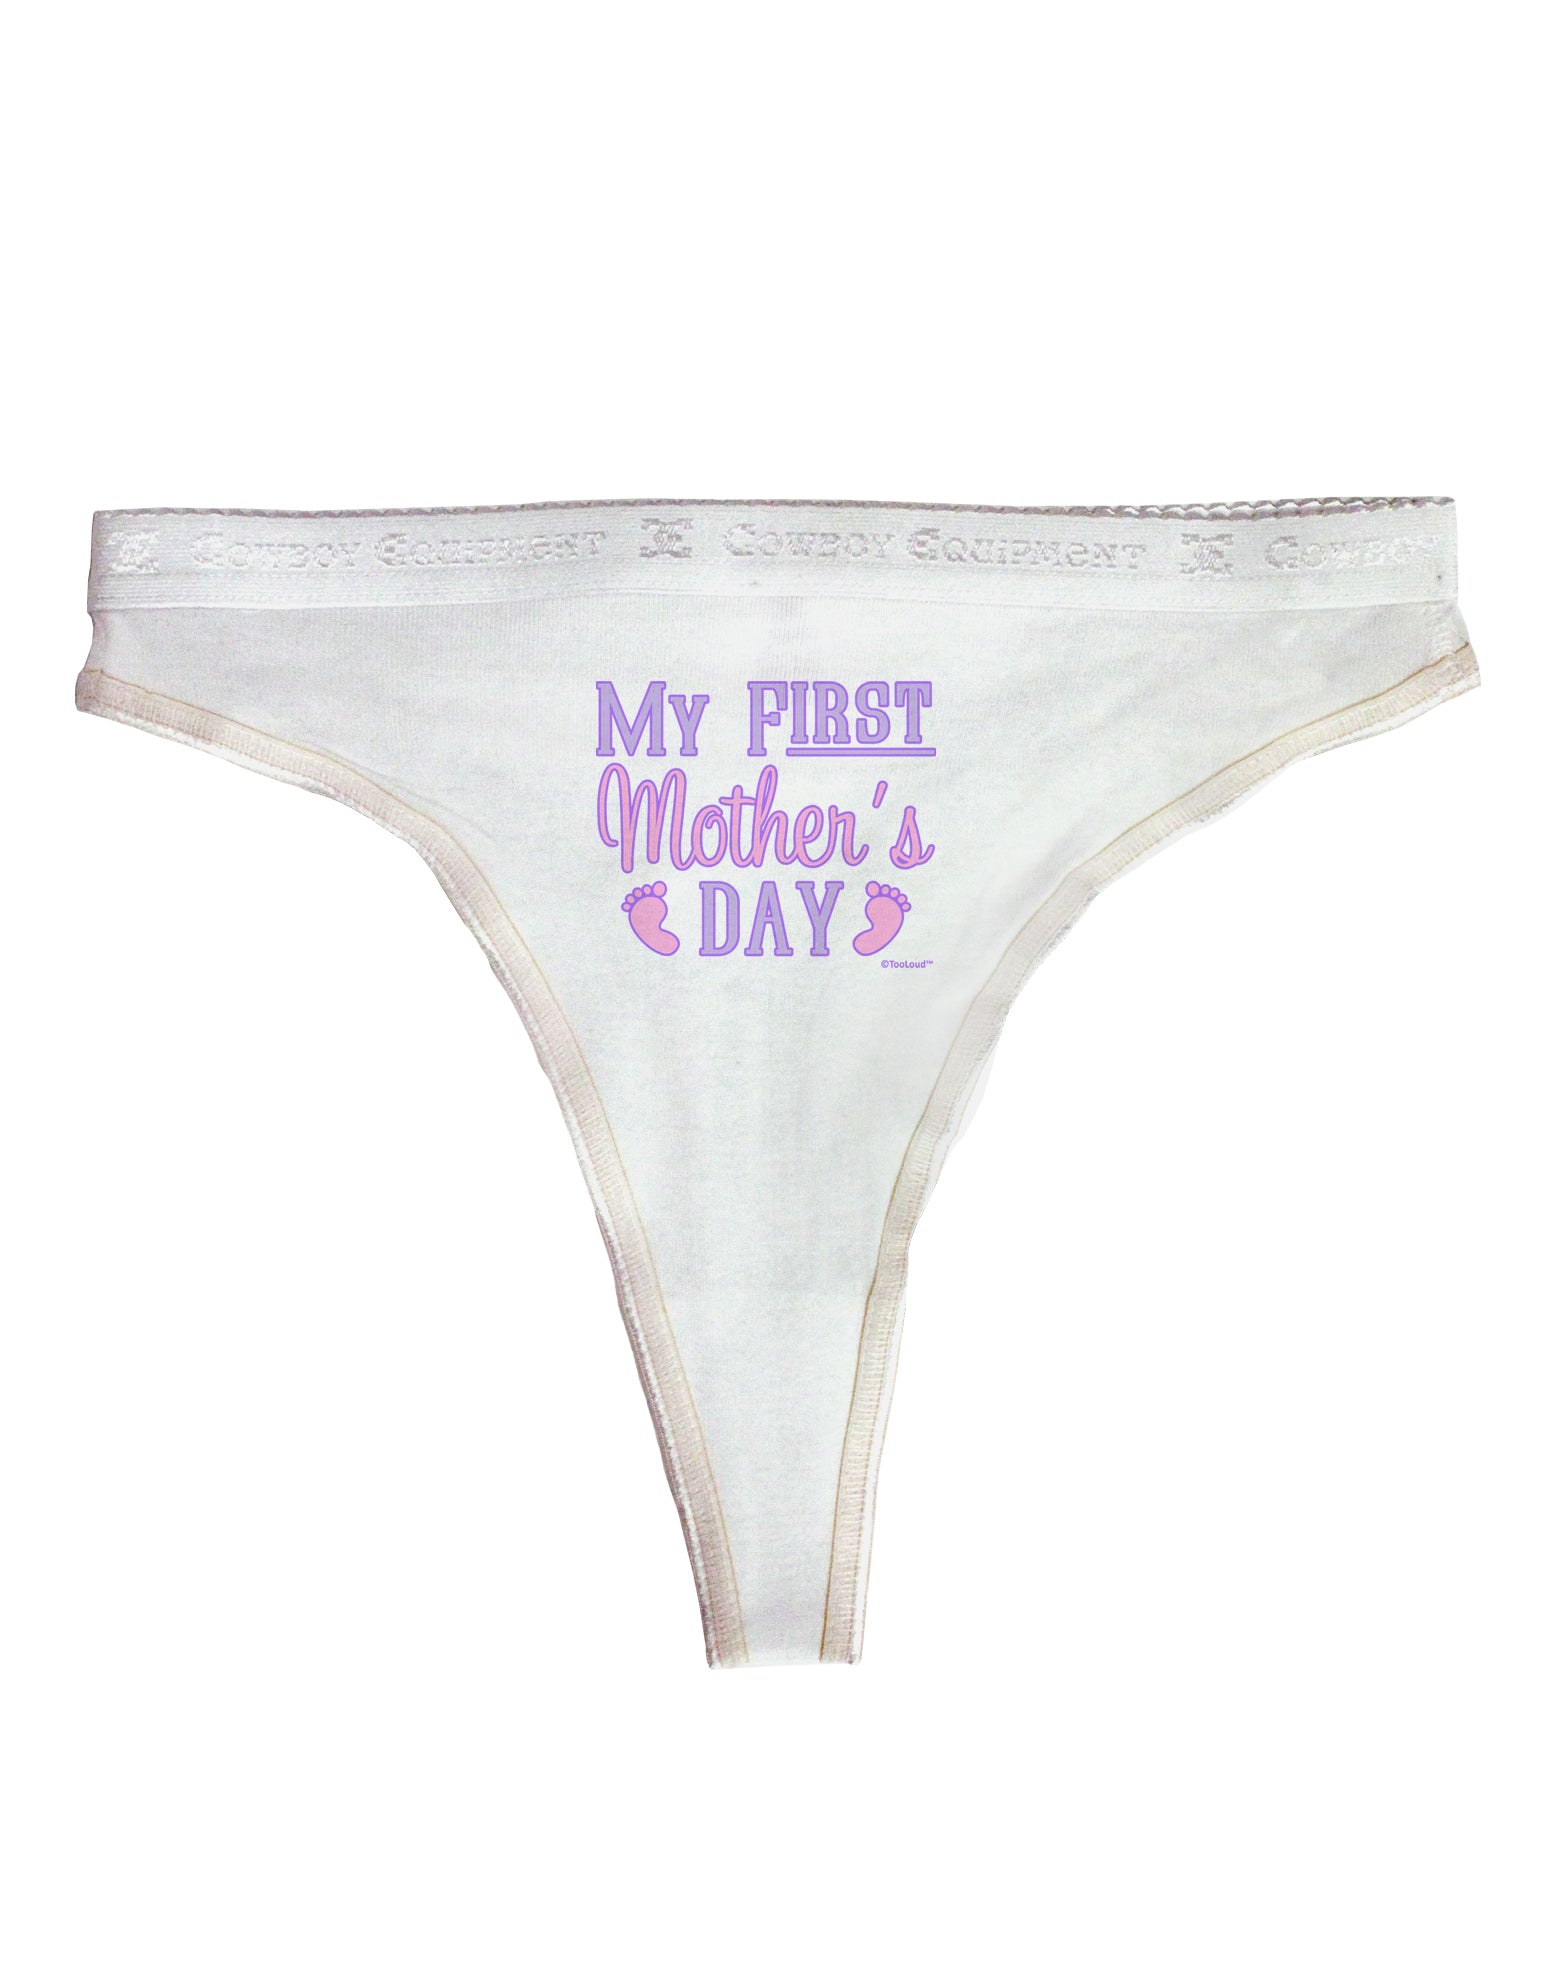 My First Mother's Day - Baby Feet - Pink Womens Thong Underwear by